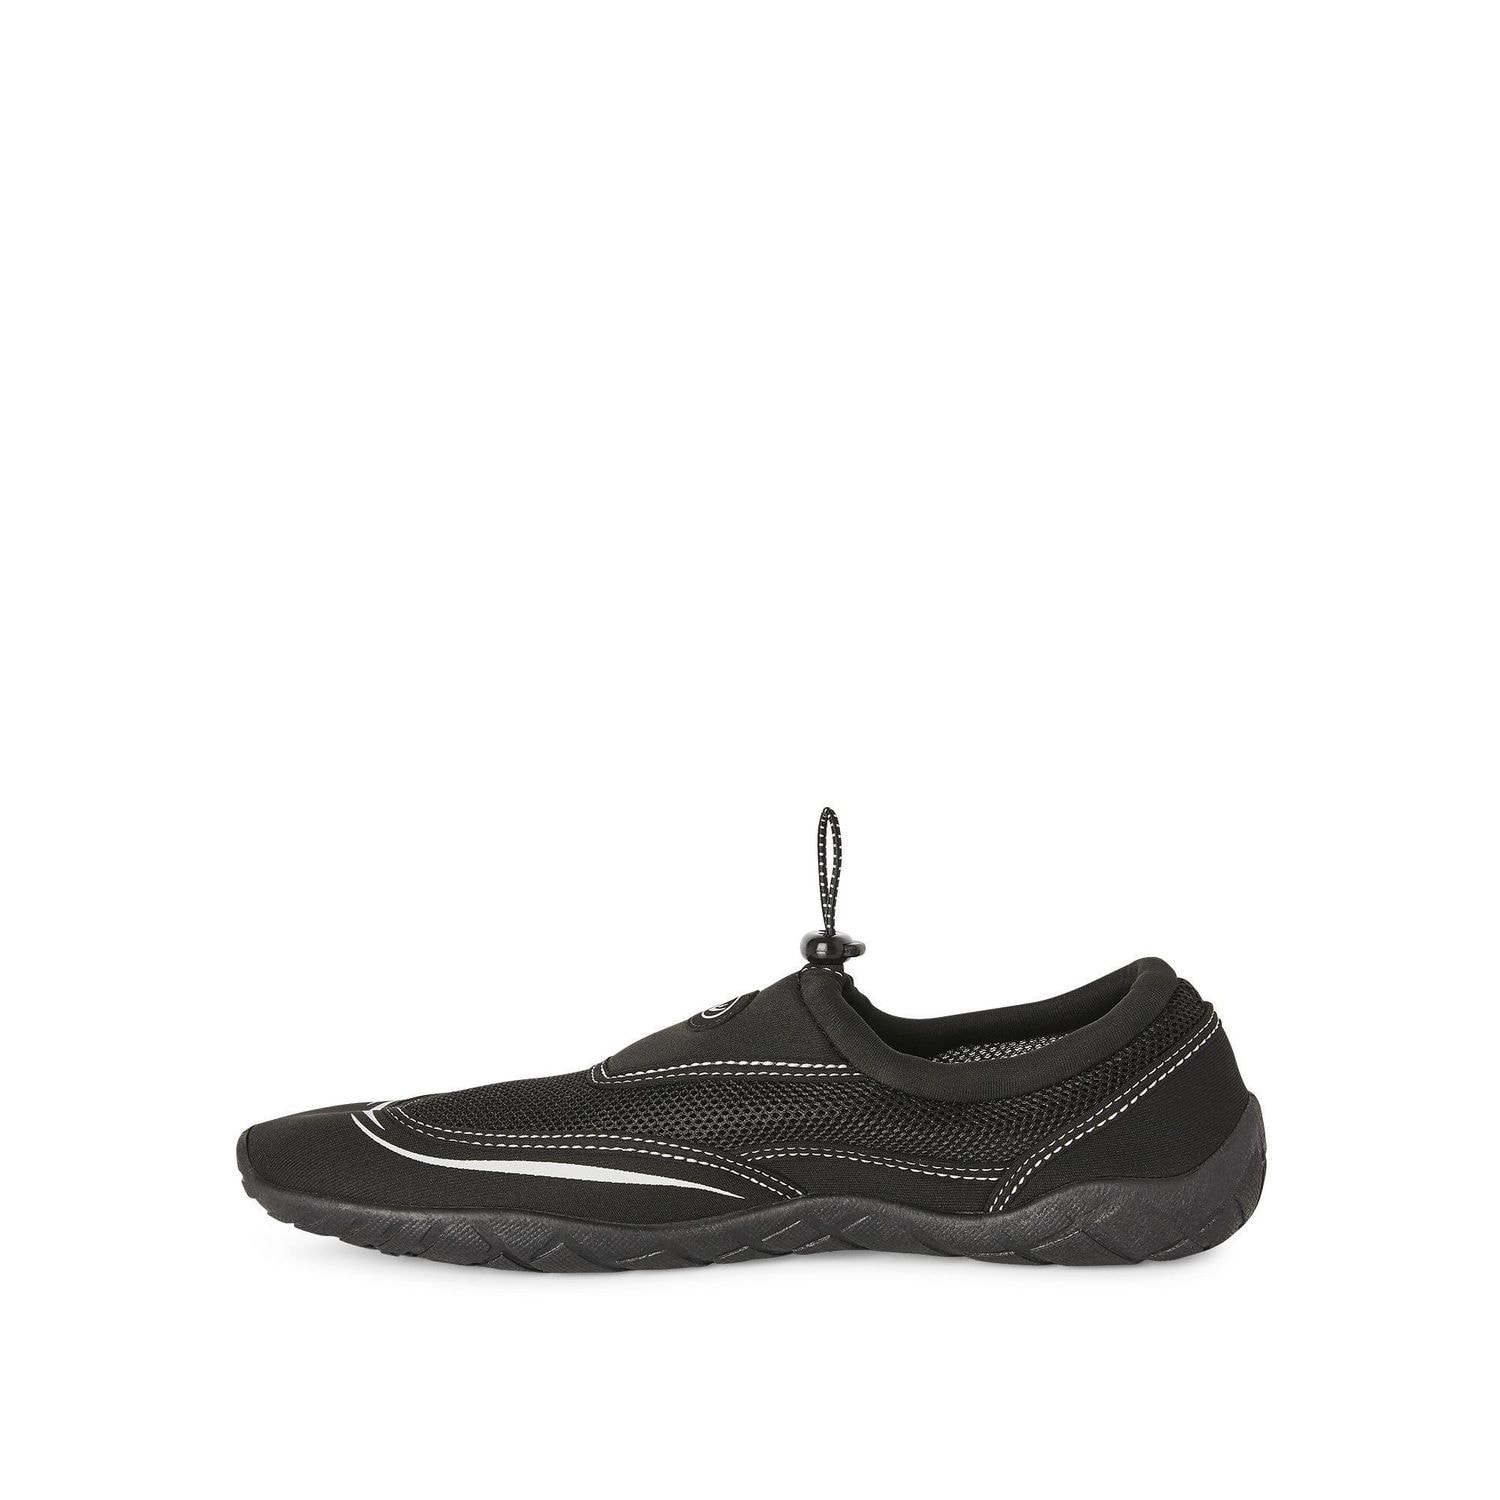 Athletic Works Men's Water Shoes, Sizes 7/8-11/12 